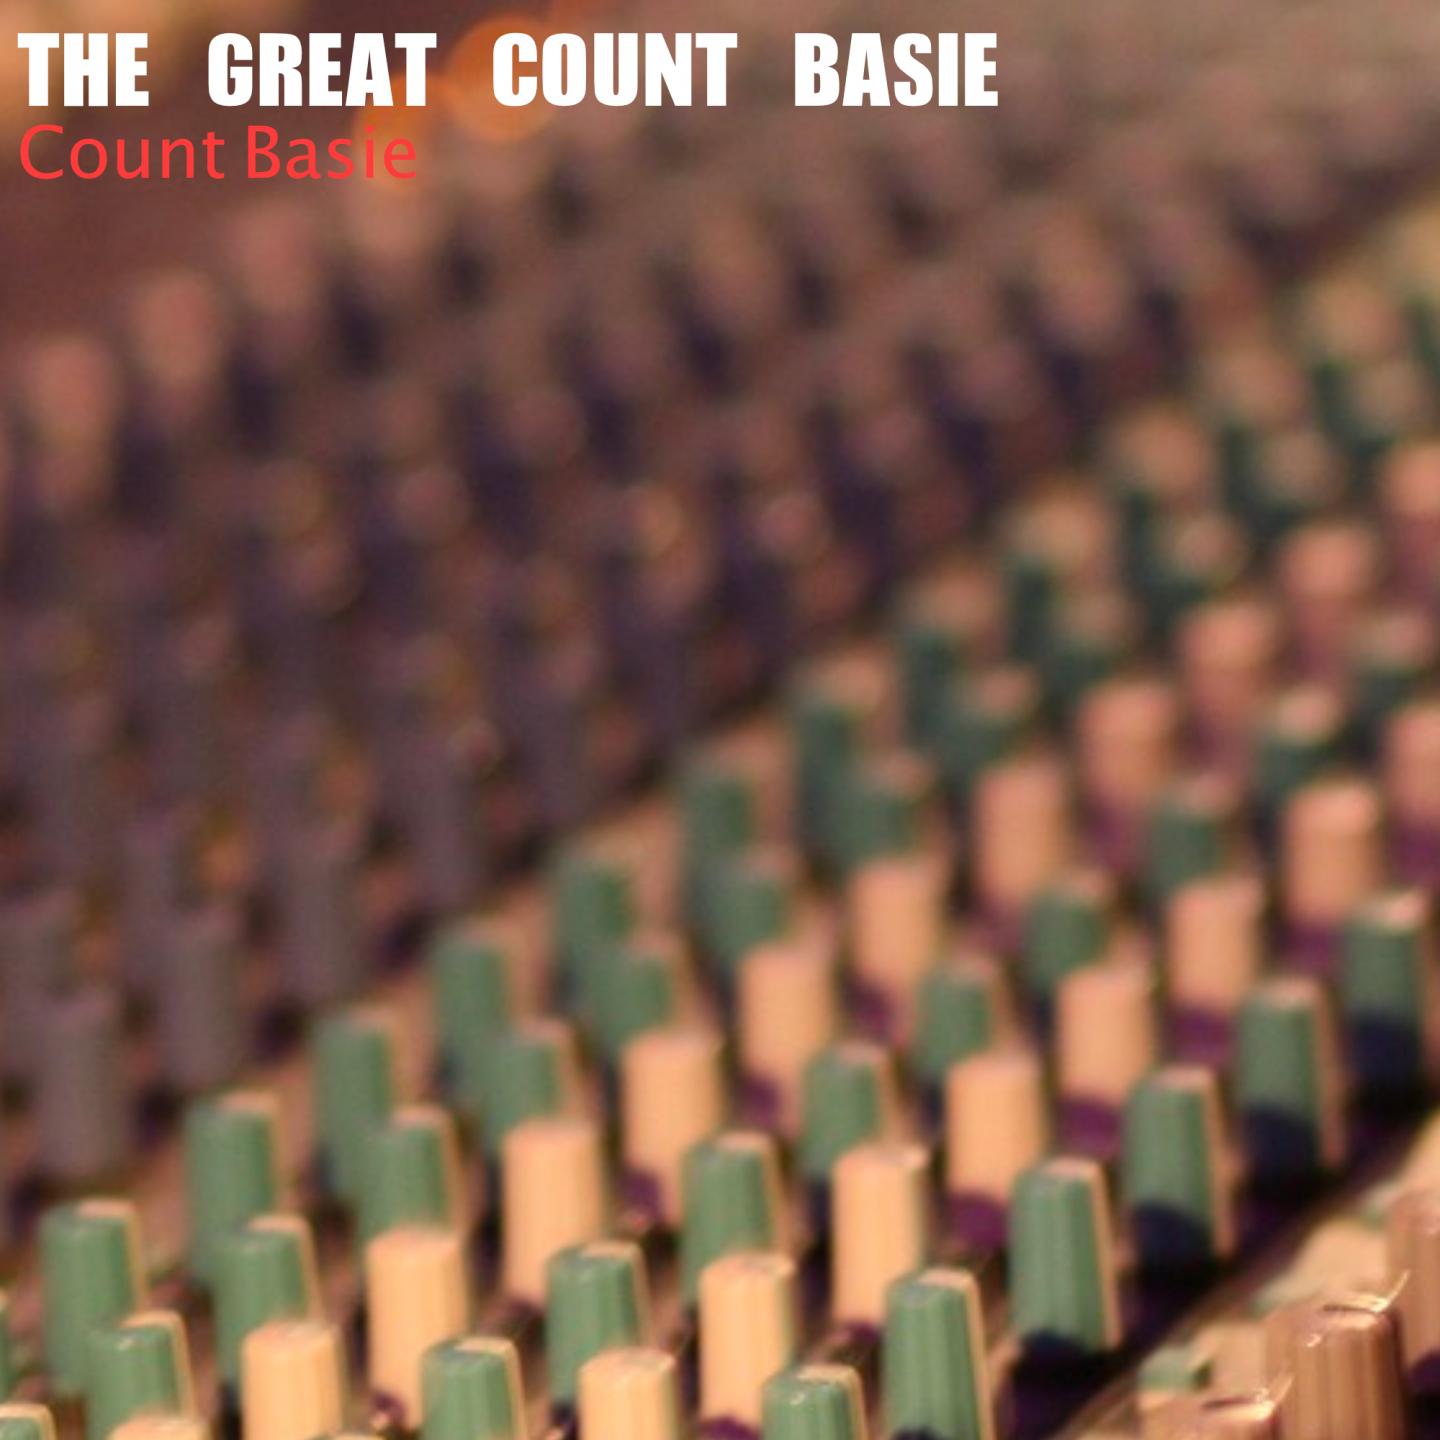 The Great Count Basie